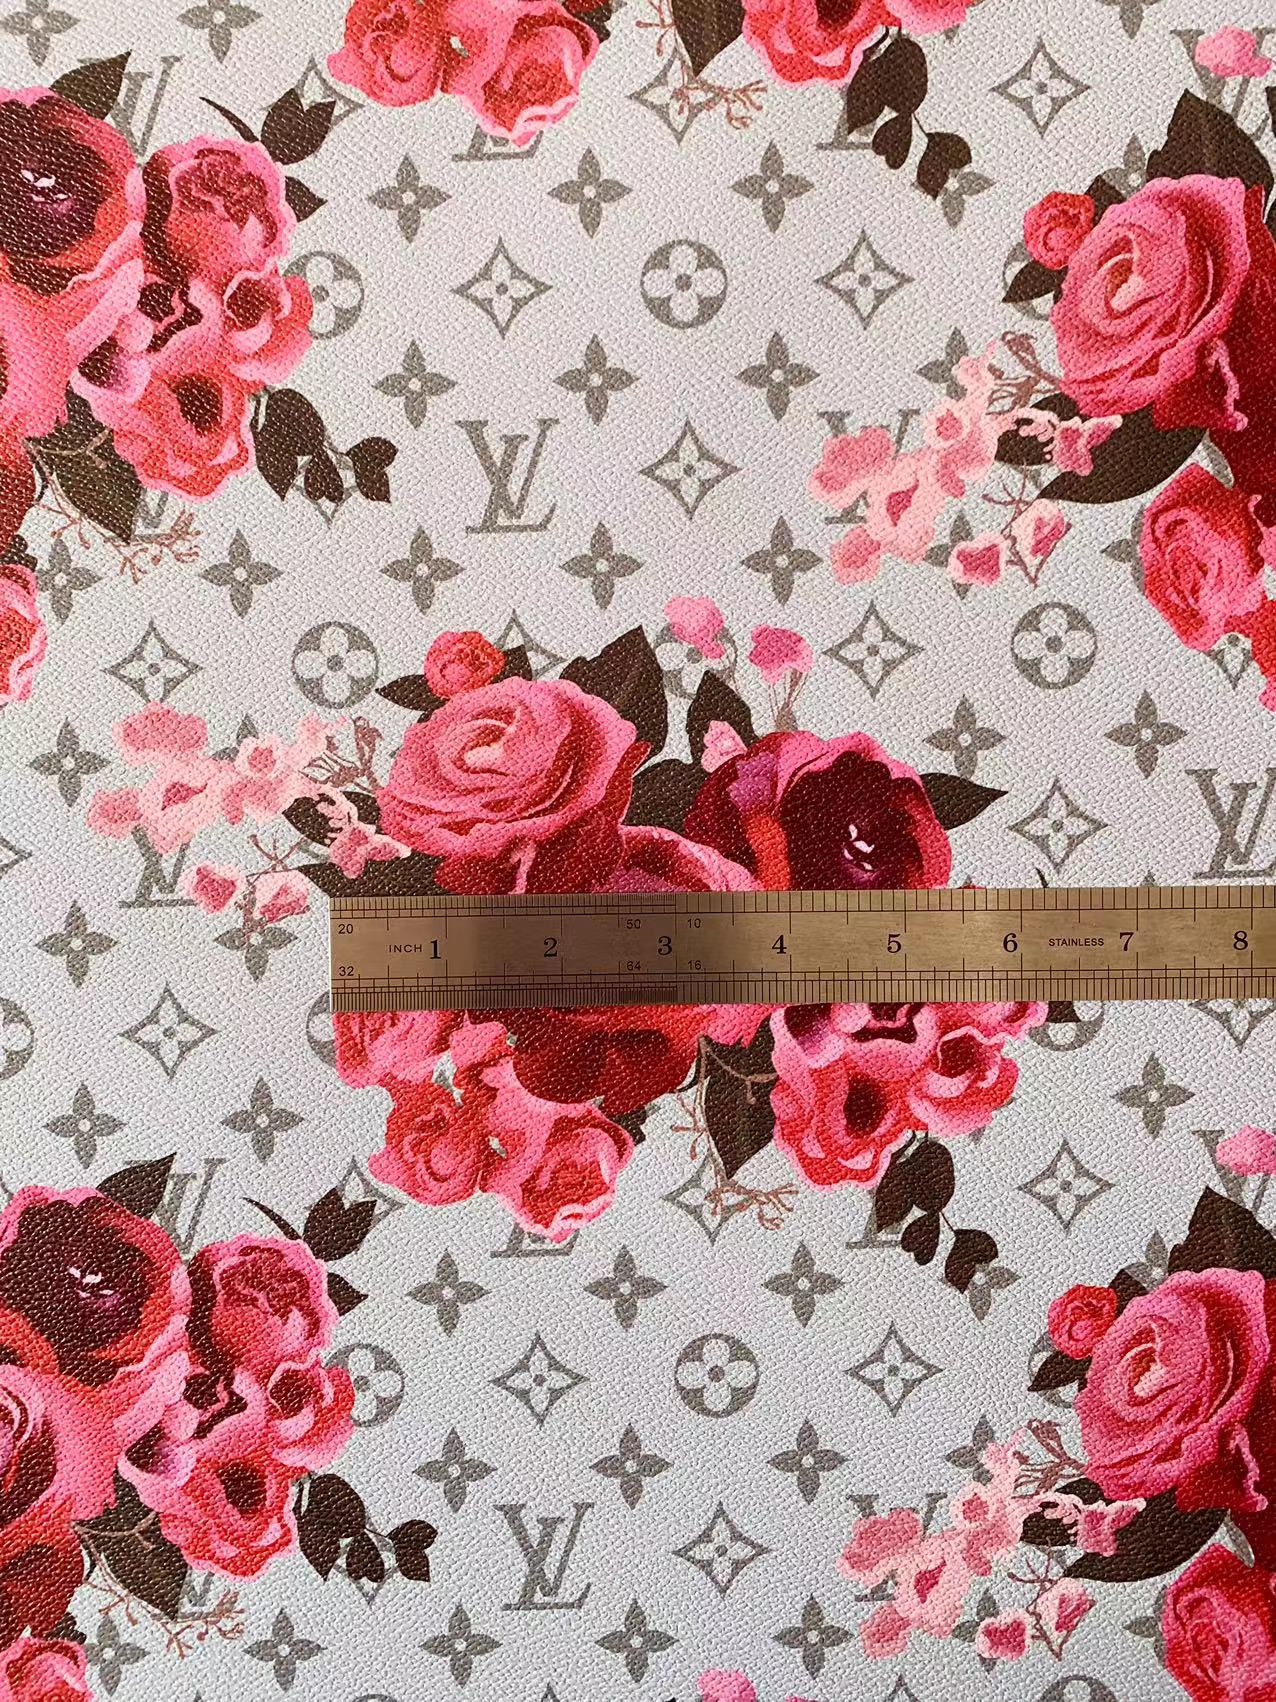 HD leather vuitton wallpapers